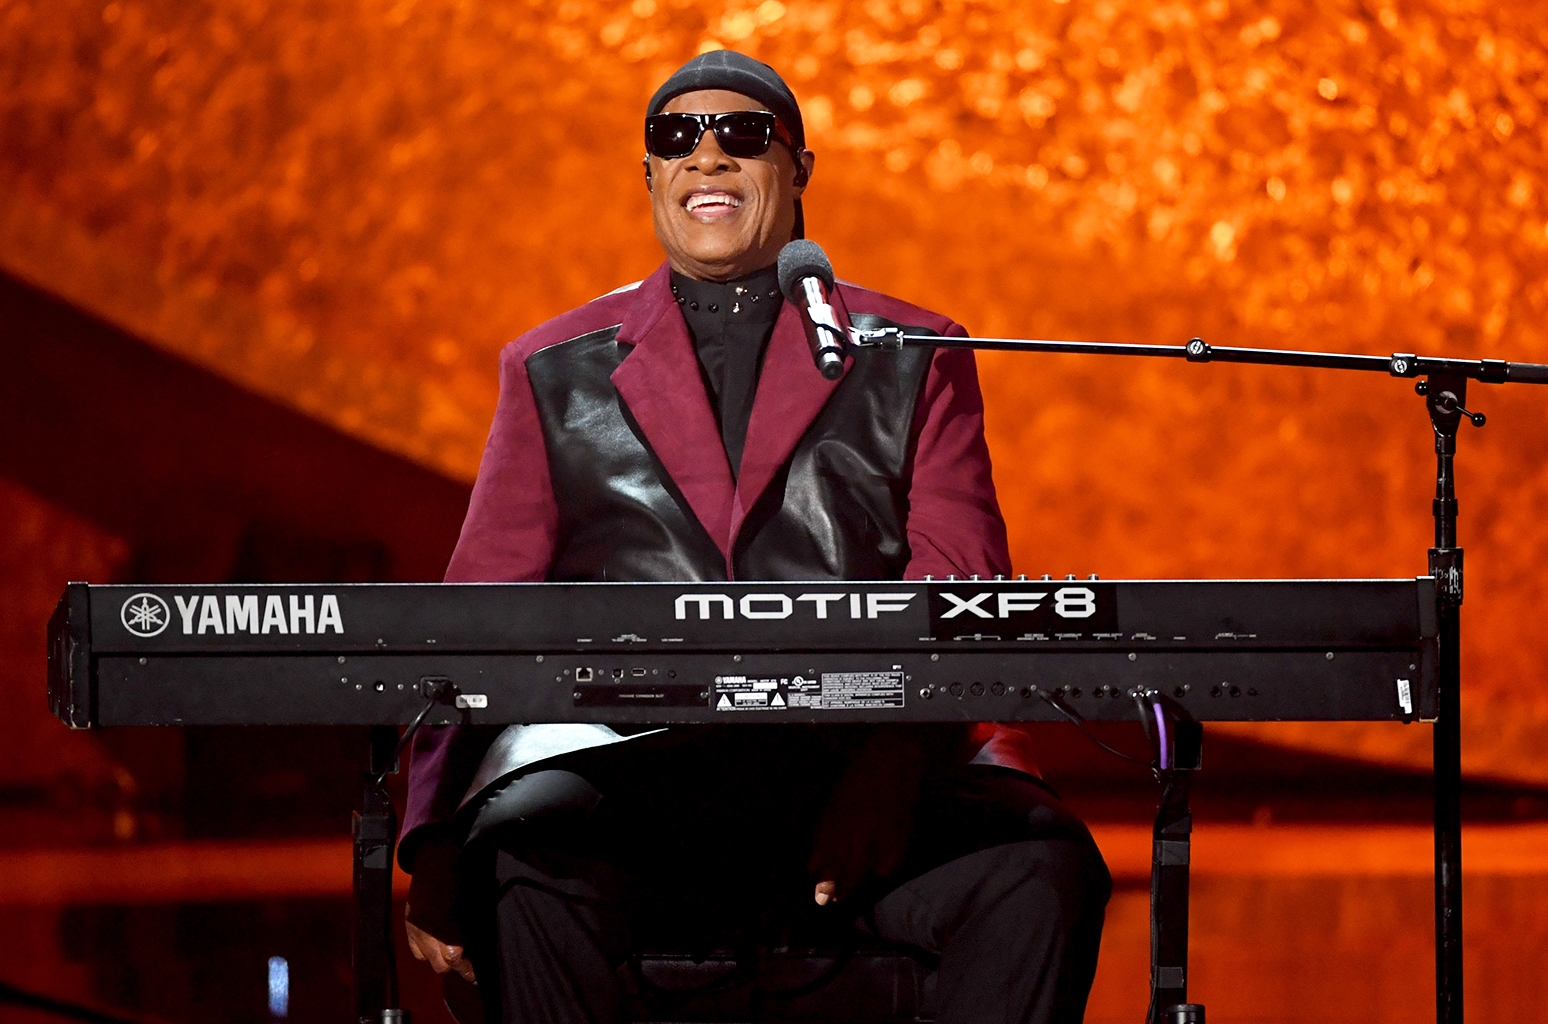 Stevie Wonder, Diana Ross, John Legend & More to Perform at Grammy Salute to Motown’s 60th Anniversary